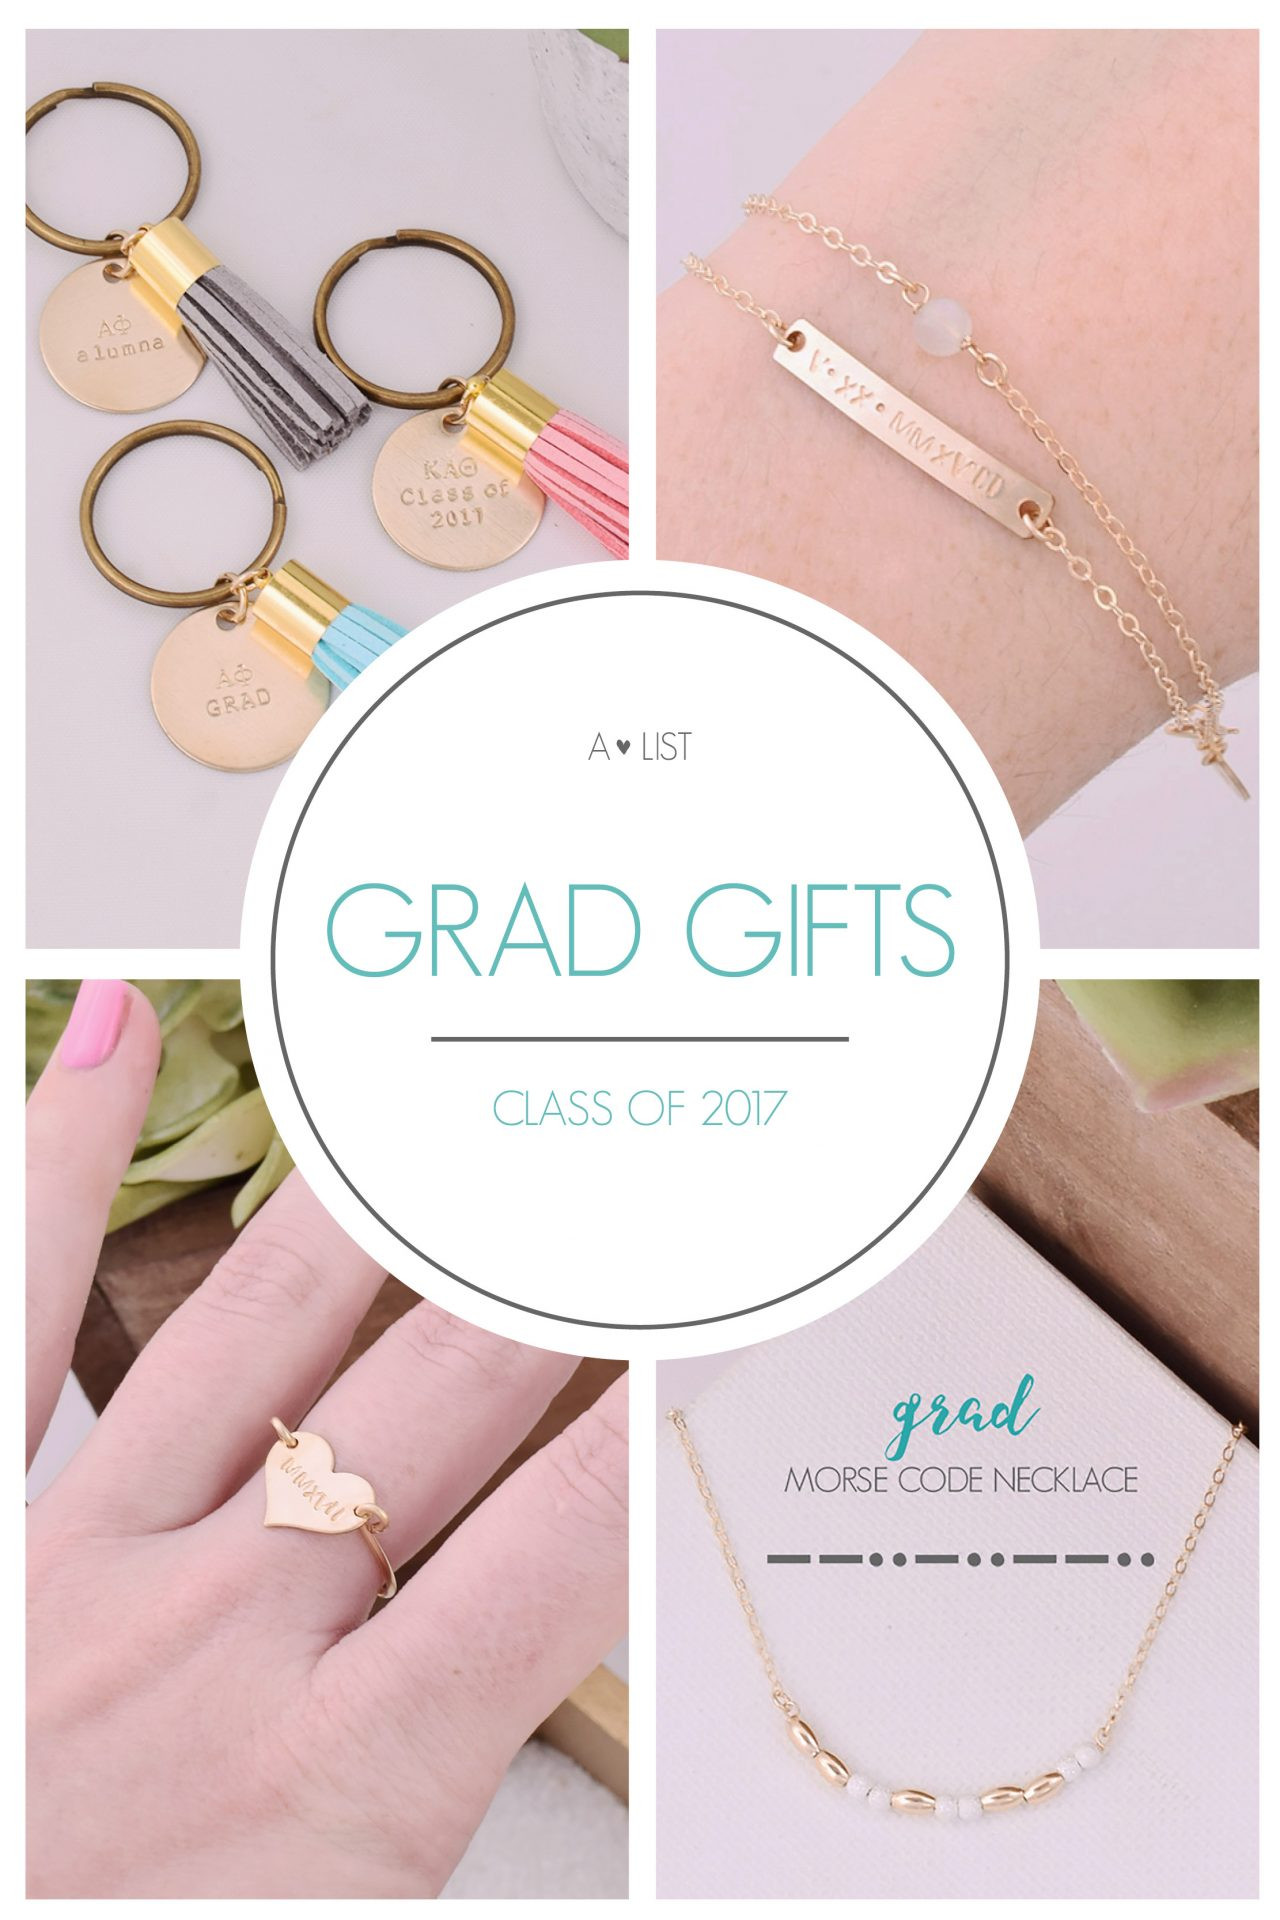 Best College Graduation Gift Ideas
 7 Graduation Gifts College Students Actually Want